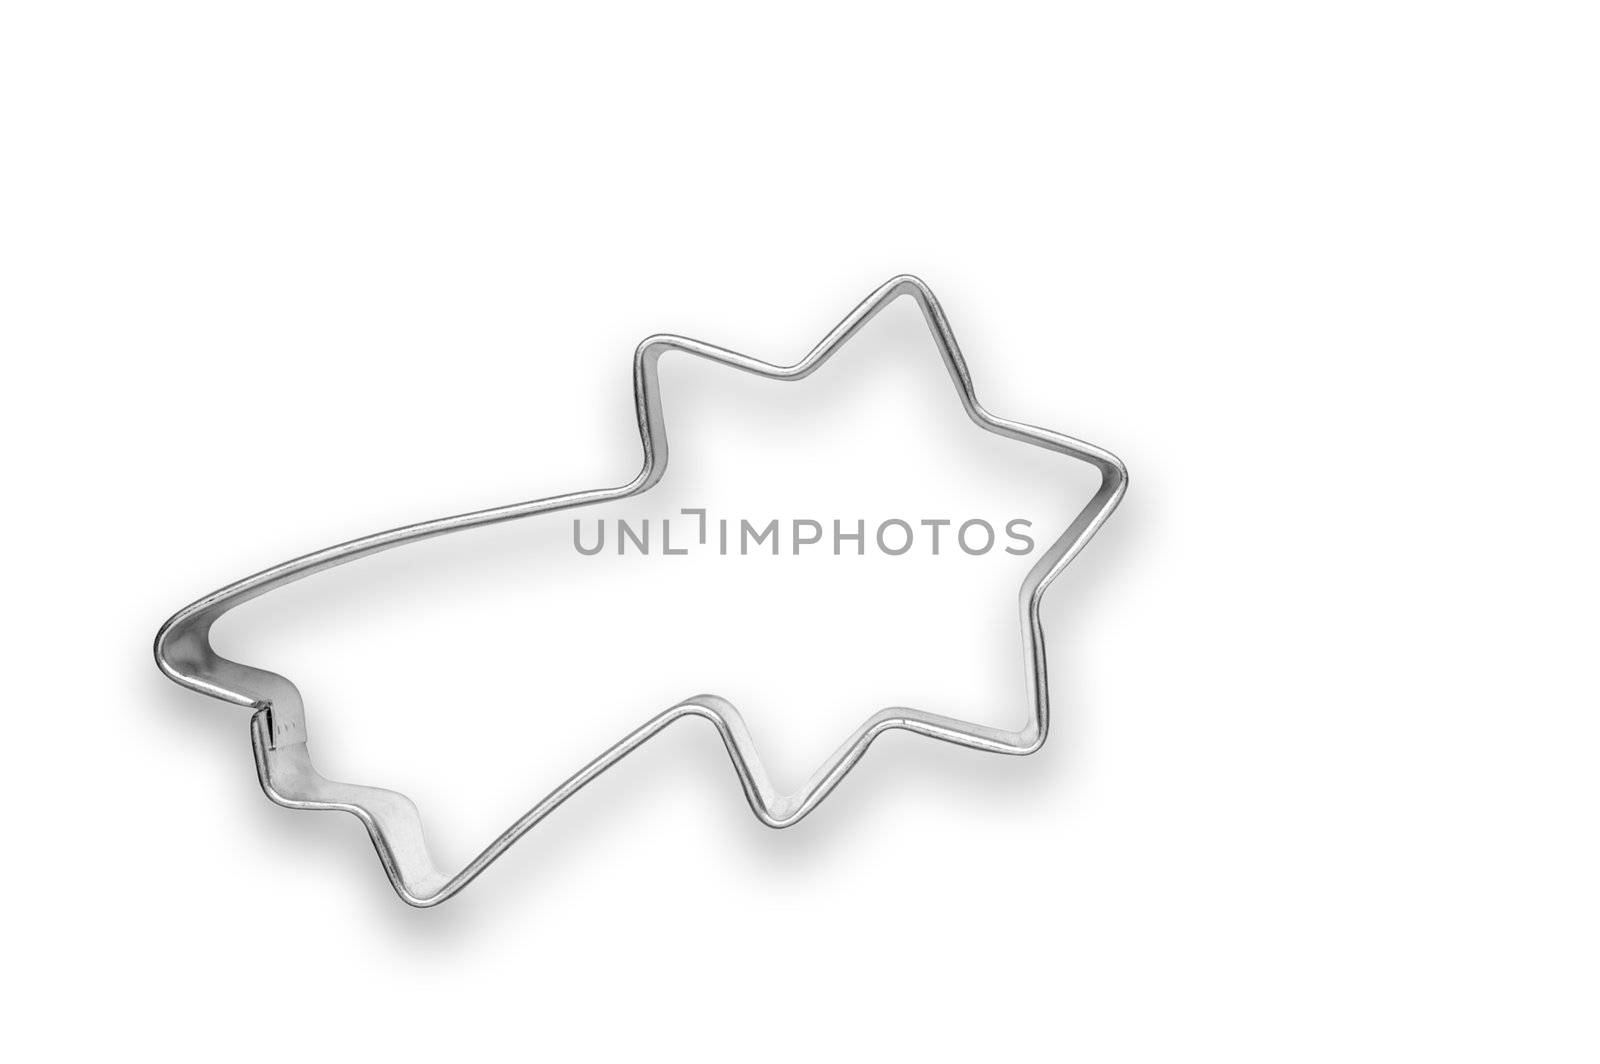 Comet shaped cookie cutter by Laborer